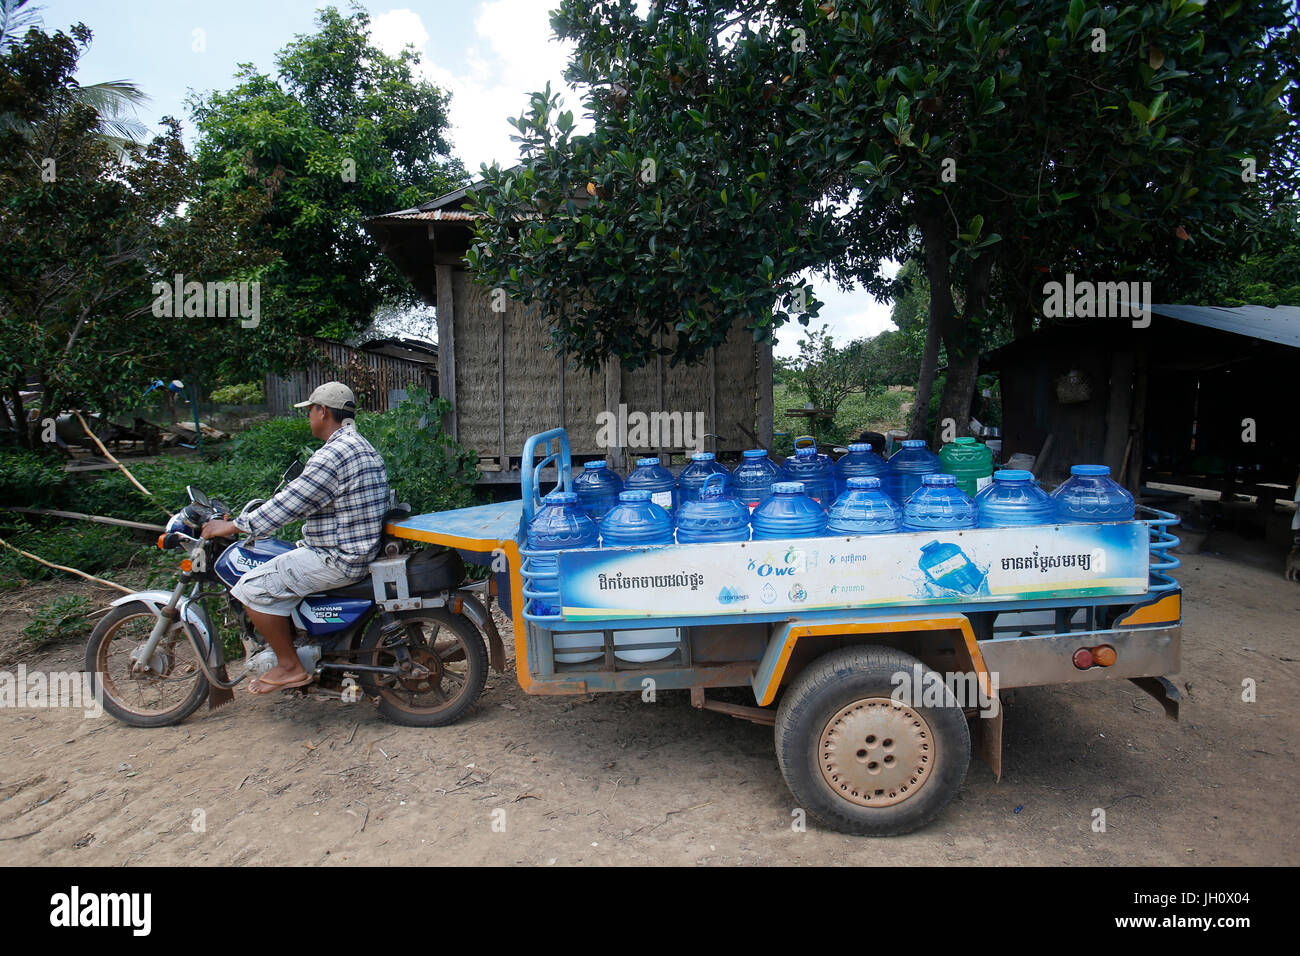 1001 Fountains water company delivery vehicle. Cambodia. Stock Photo